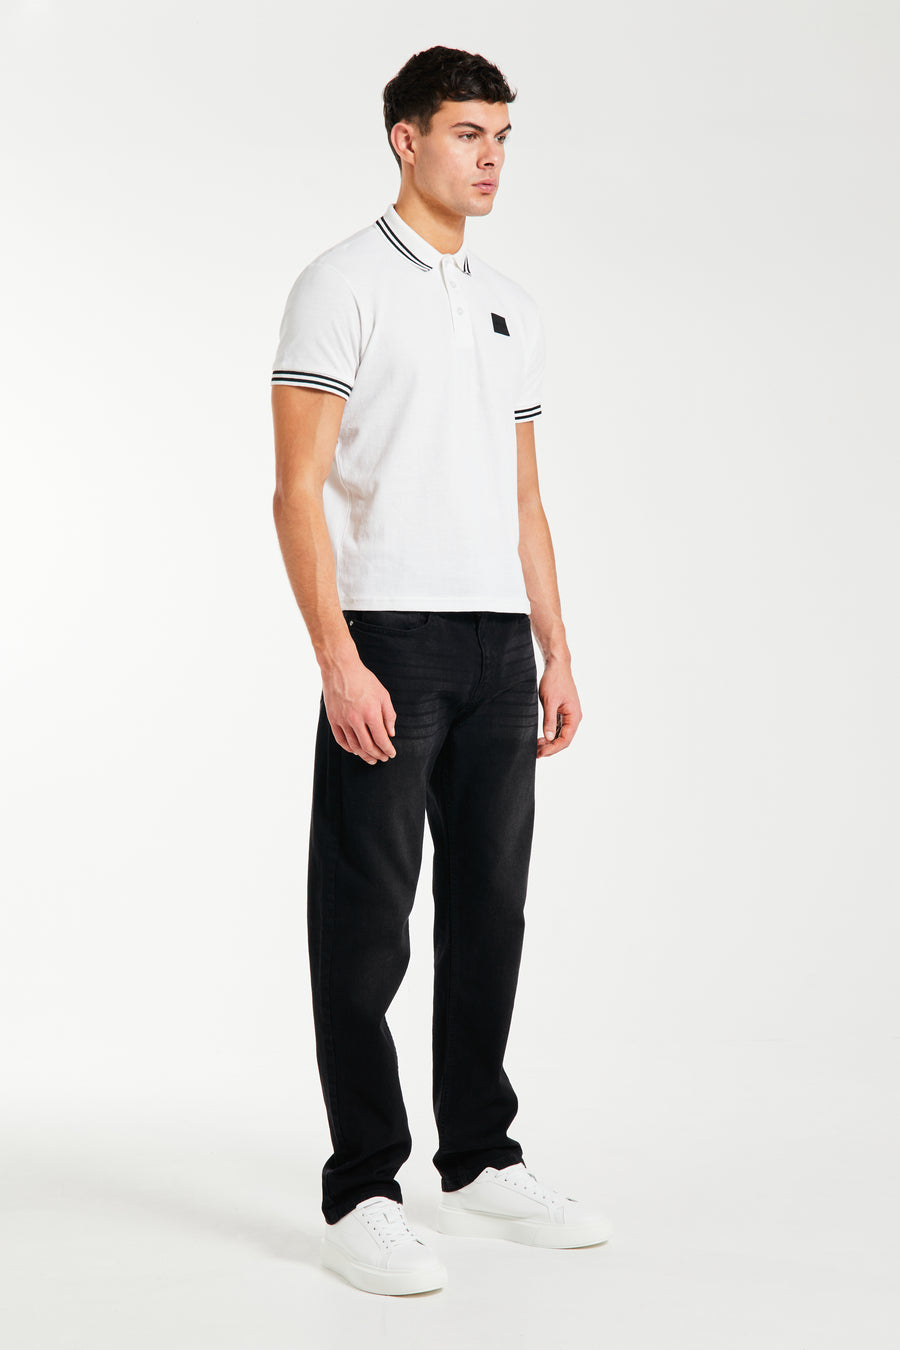 side profile of cheap polos for men in white